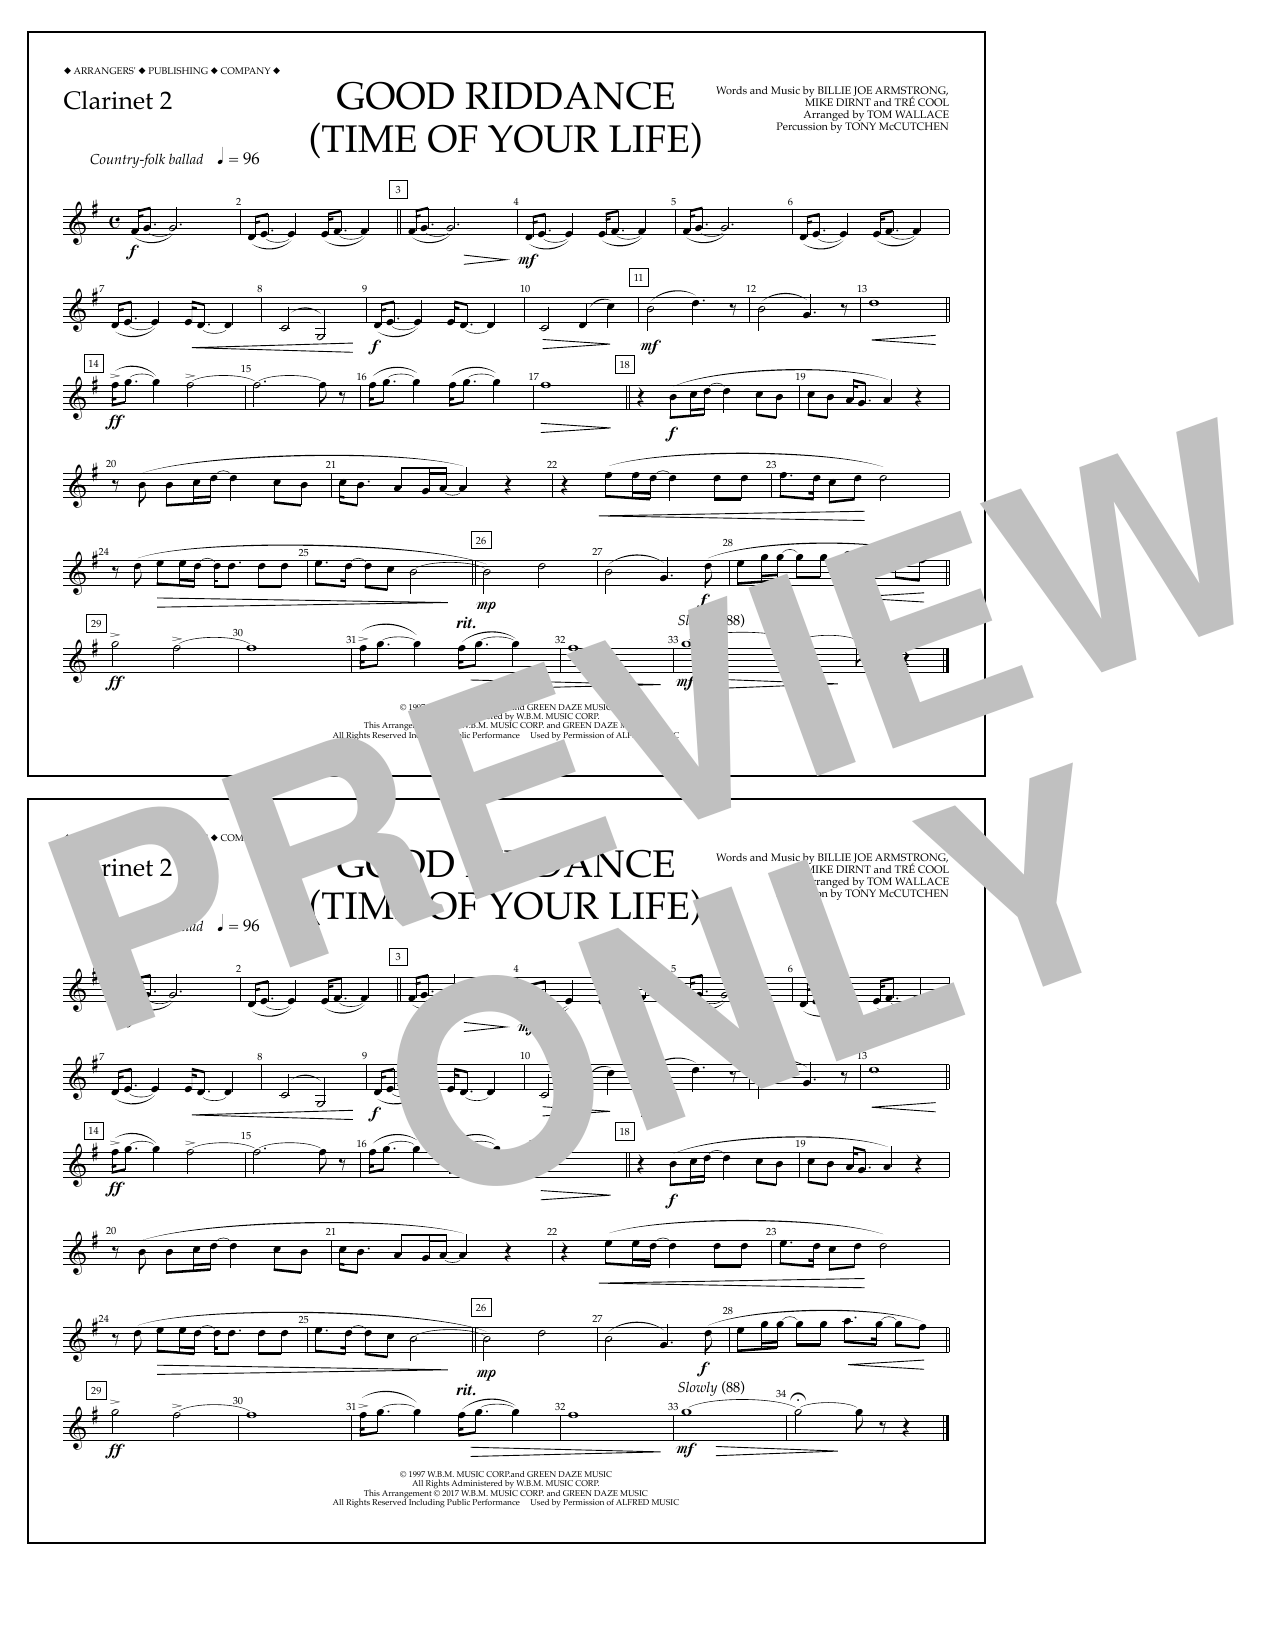 Download Tom Wallace Good Riddance (Time of Your Life) - Cla Sheet Music